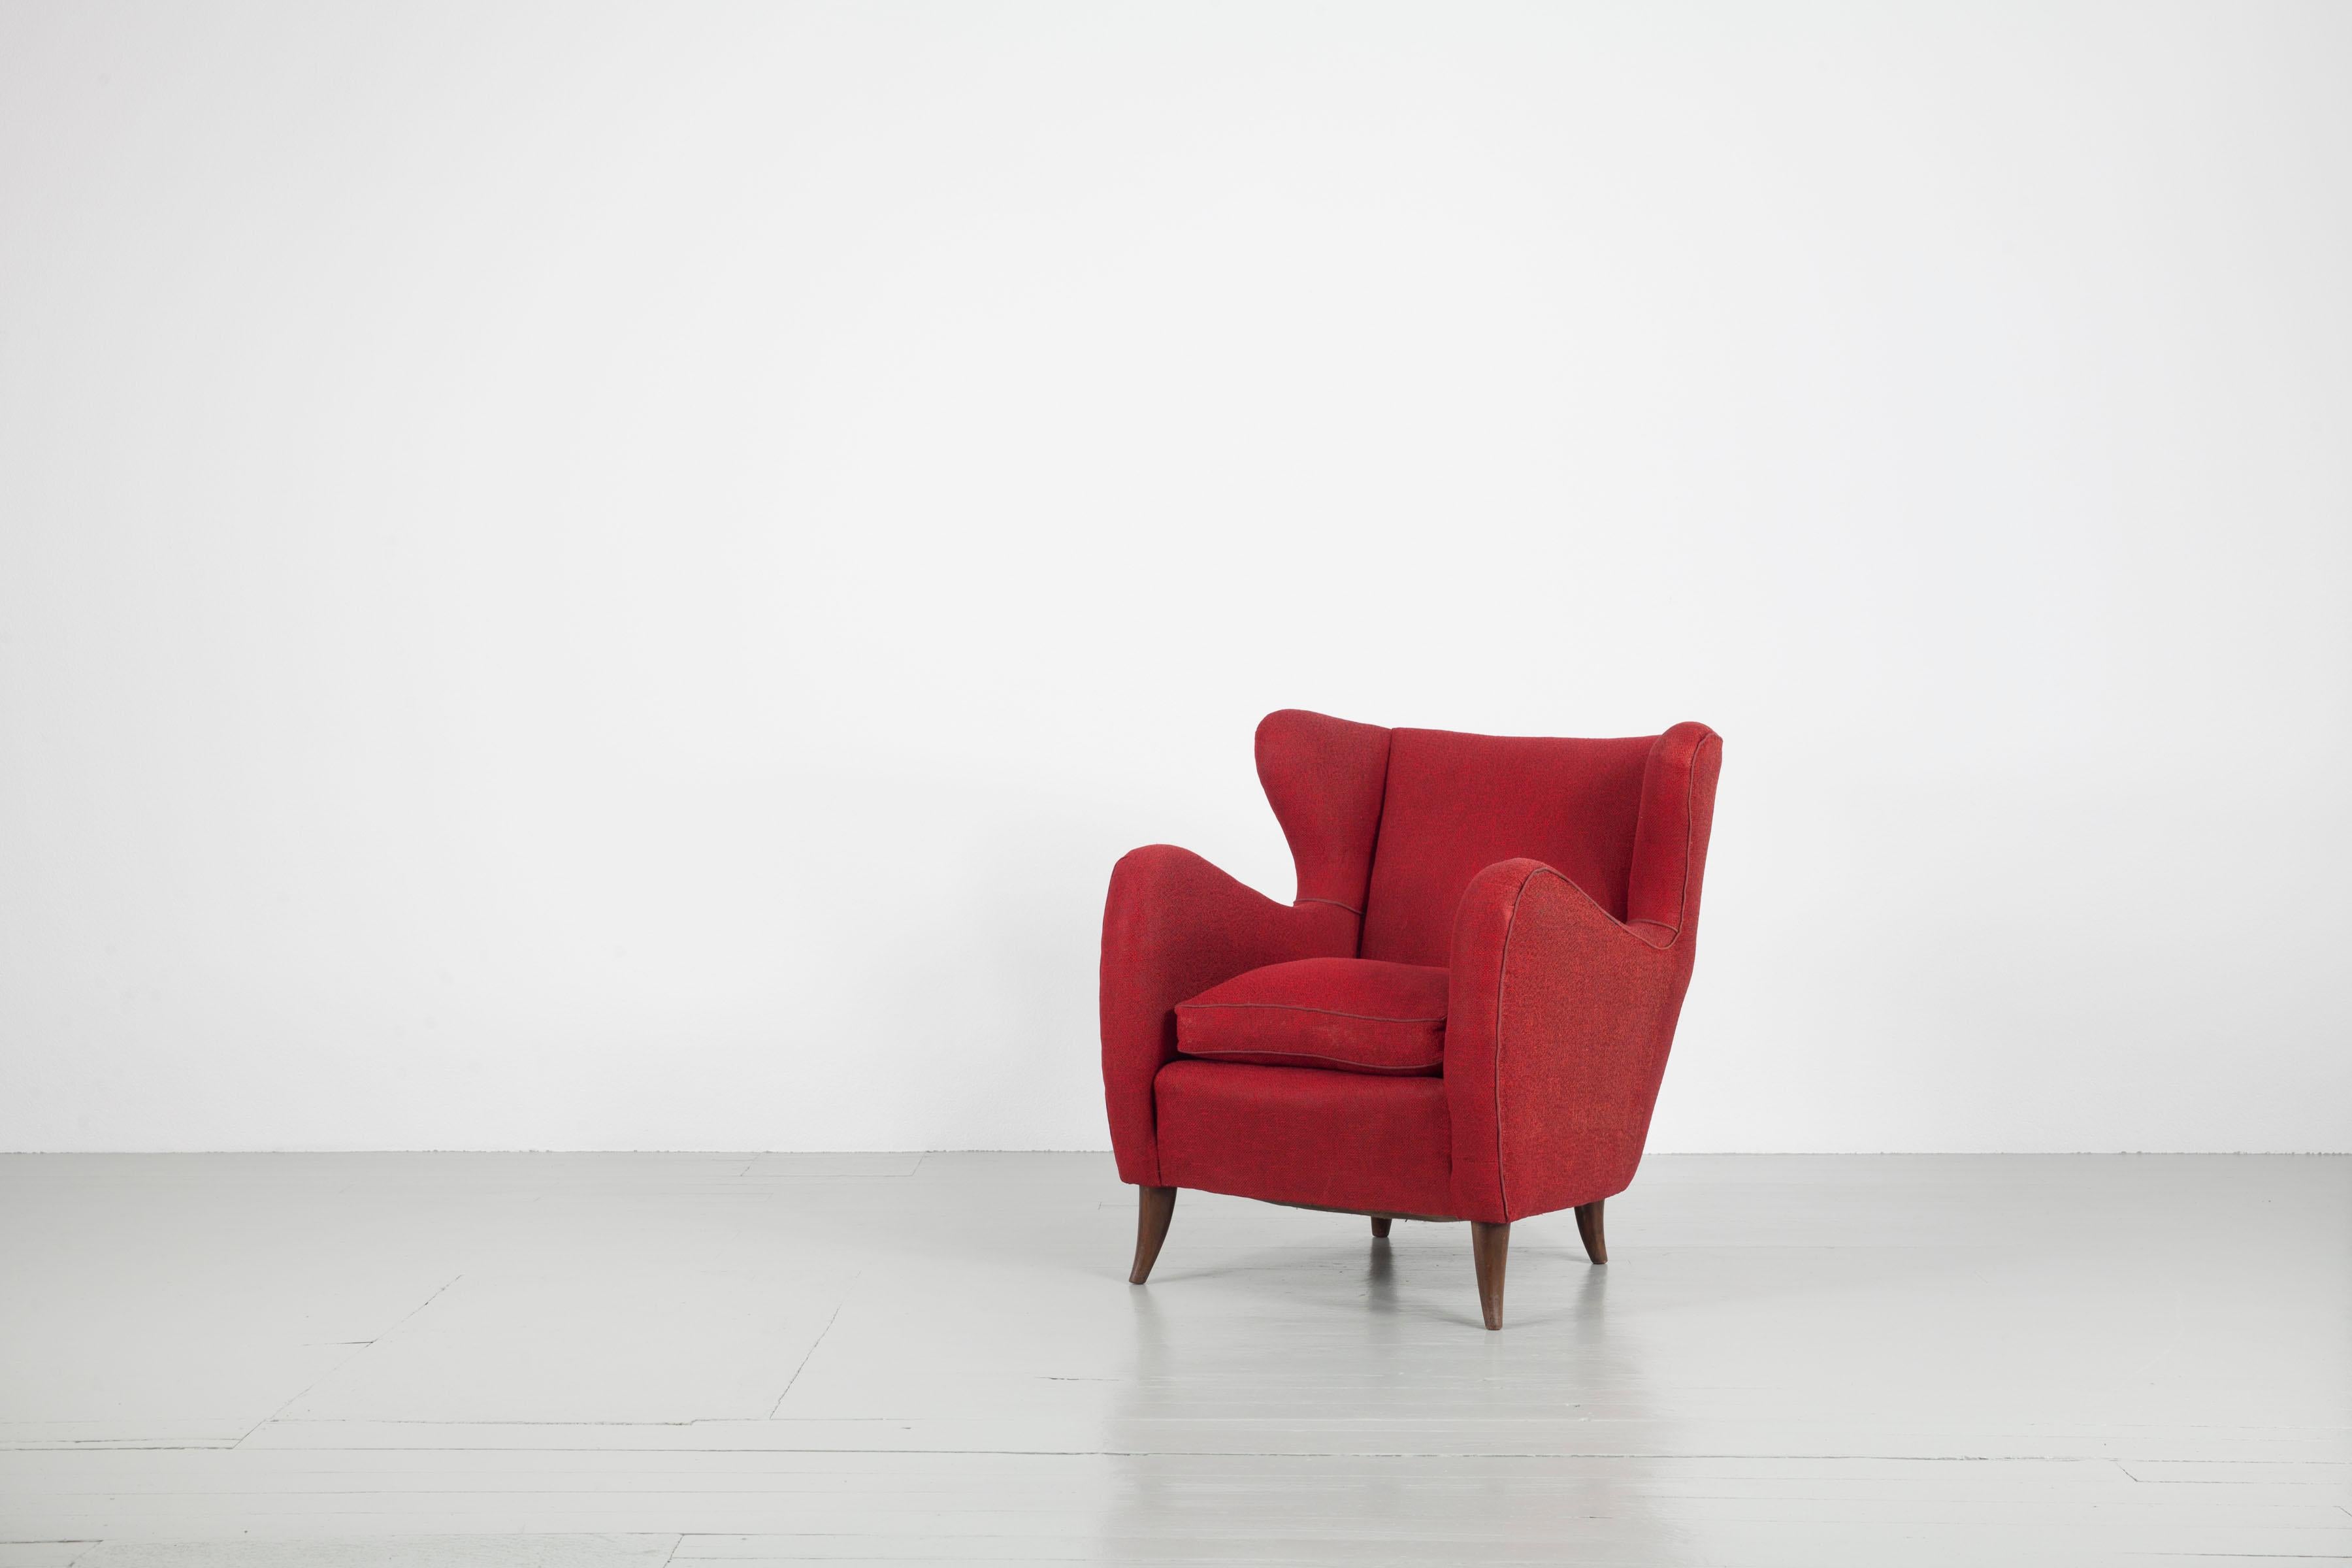 Pair of armchairs design by Melchiorre Bega, Italy, 1950s. The chairs have a compact curved form and feature the original red upholstery fabric. The armchairs are freshly cleaned and in original condition.

     